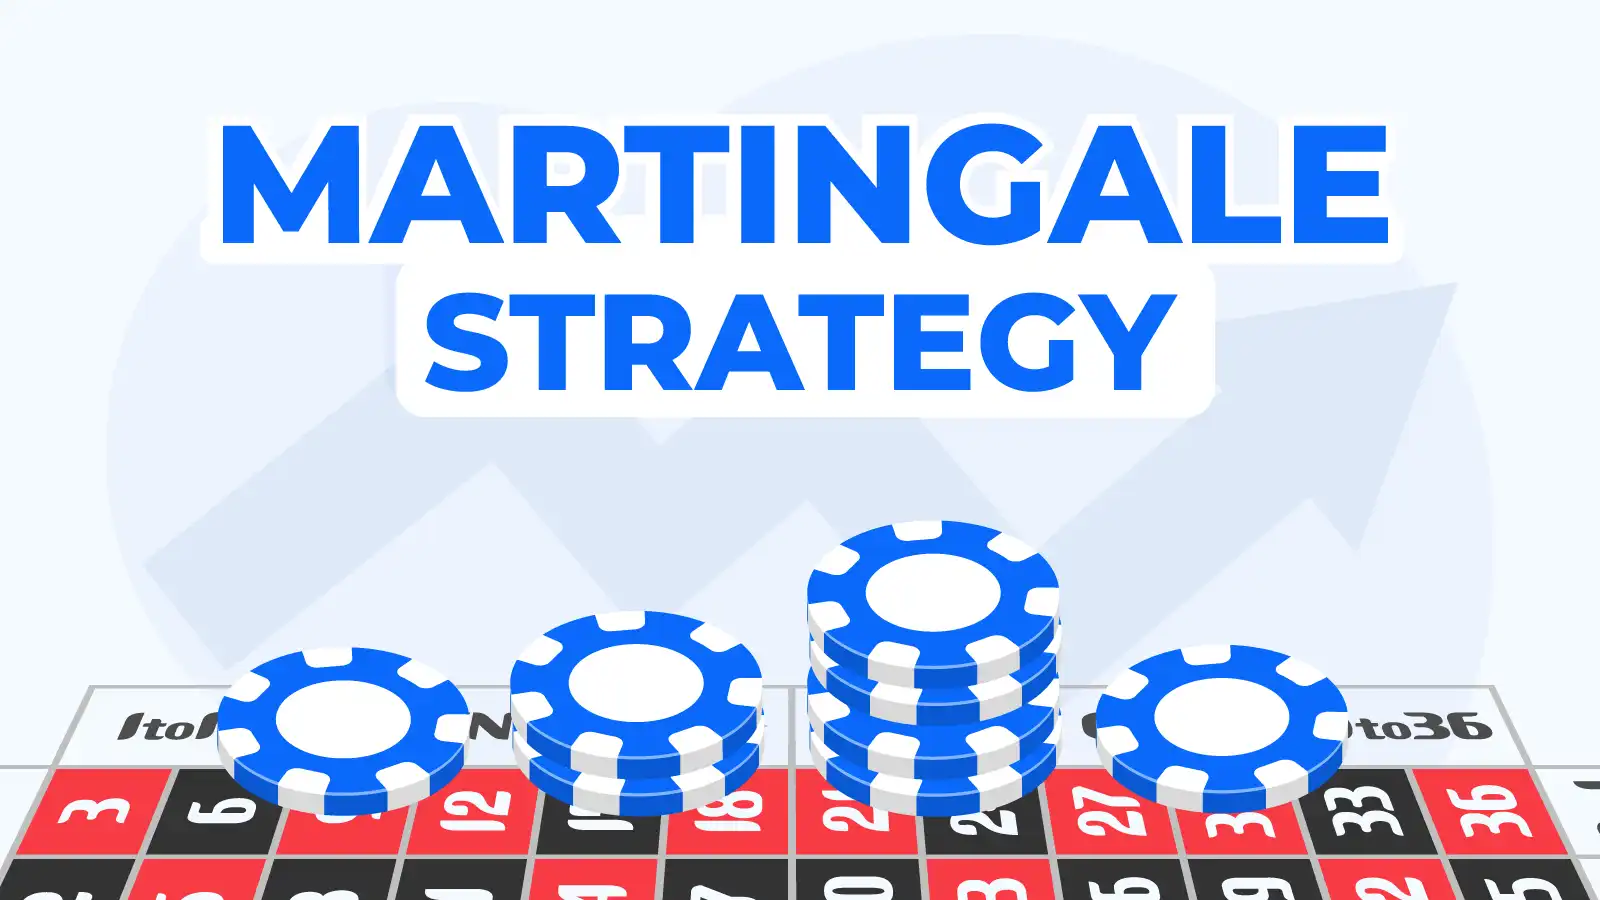 Martingale Strategy How to apply and things to keep in mind